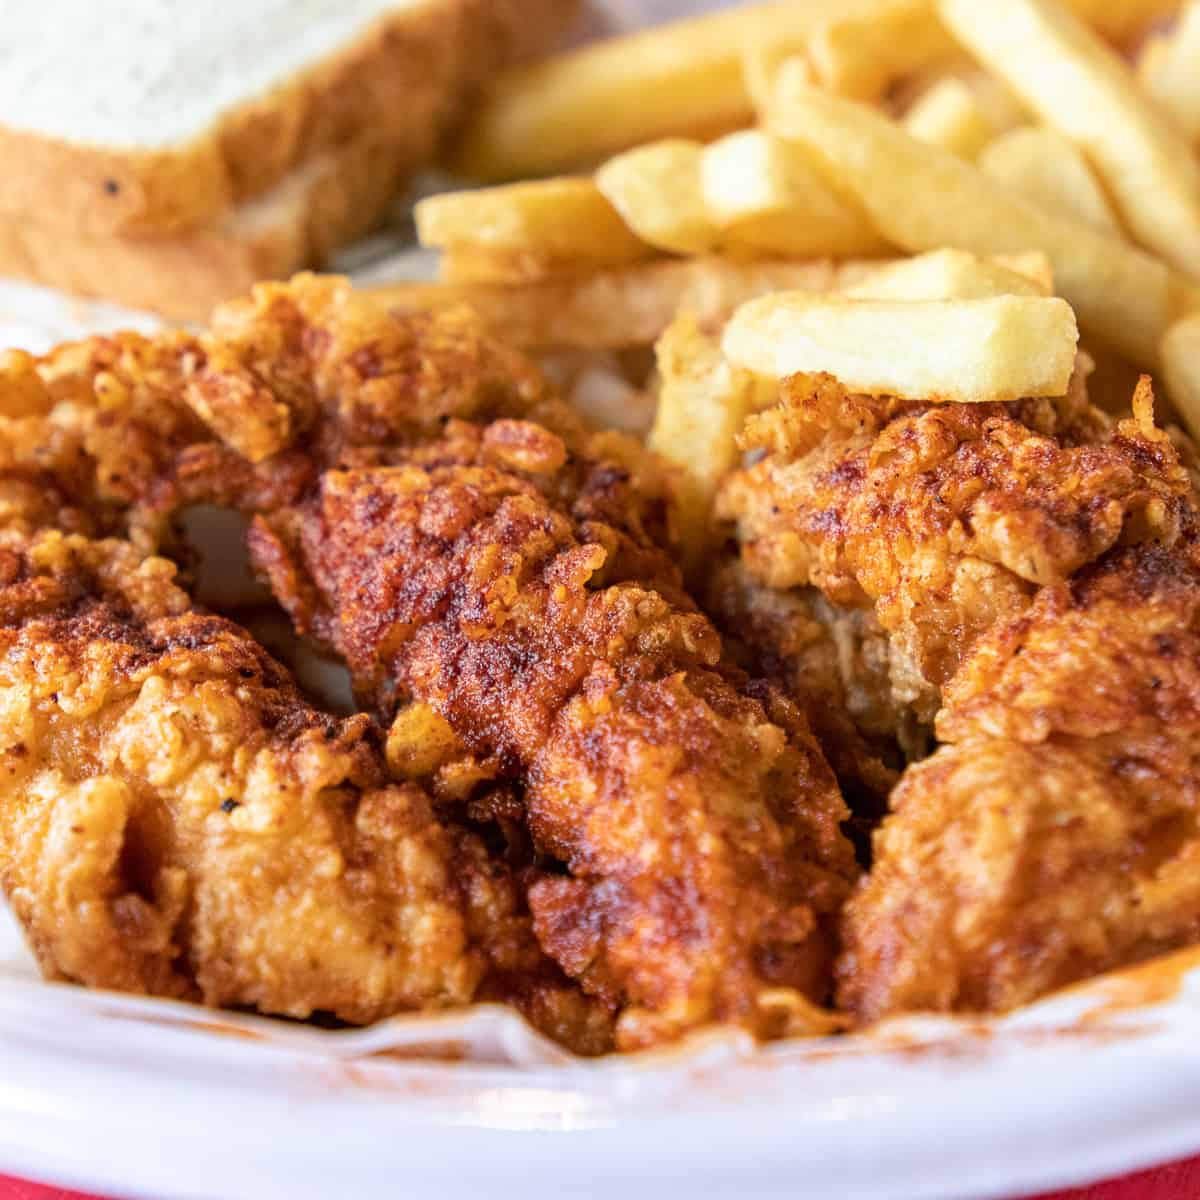 Bolton’s Spicy Fried Chicken and Fries